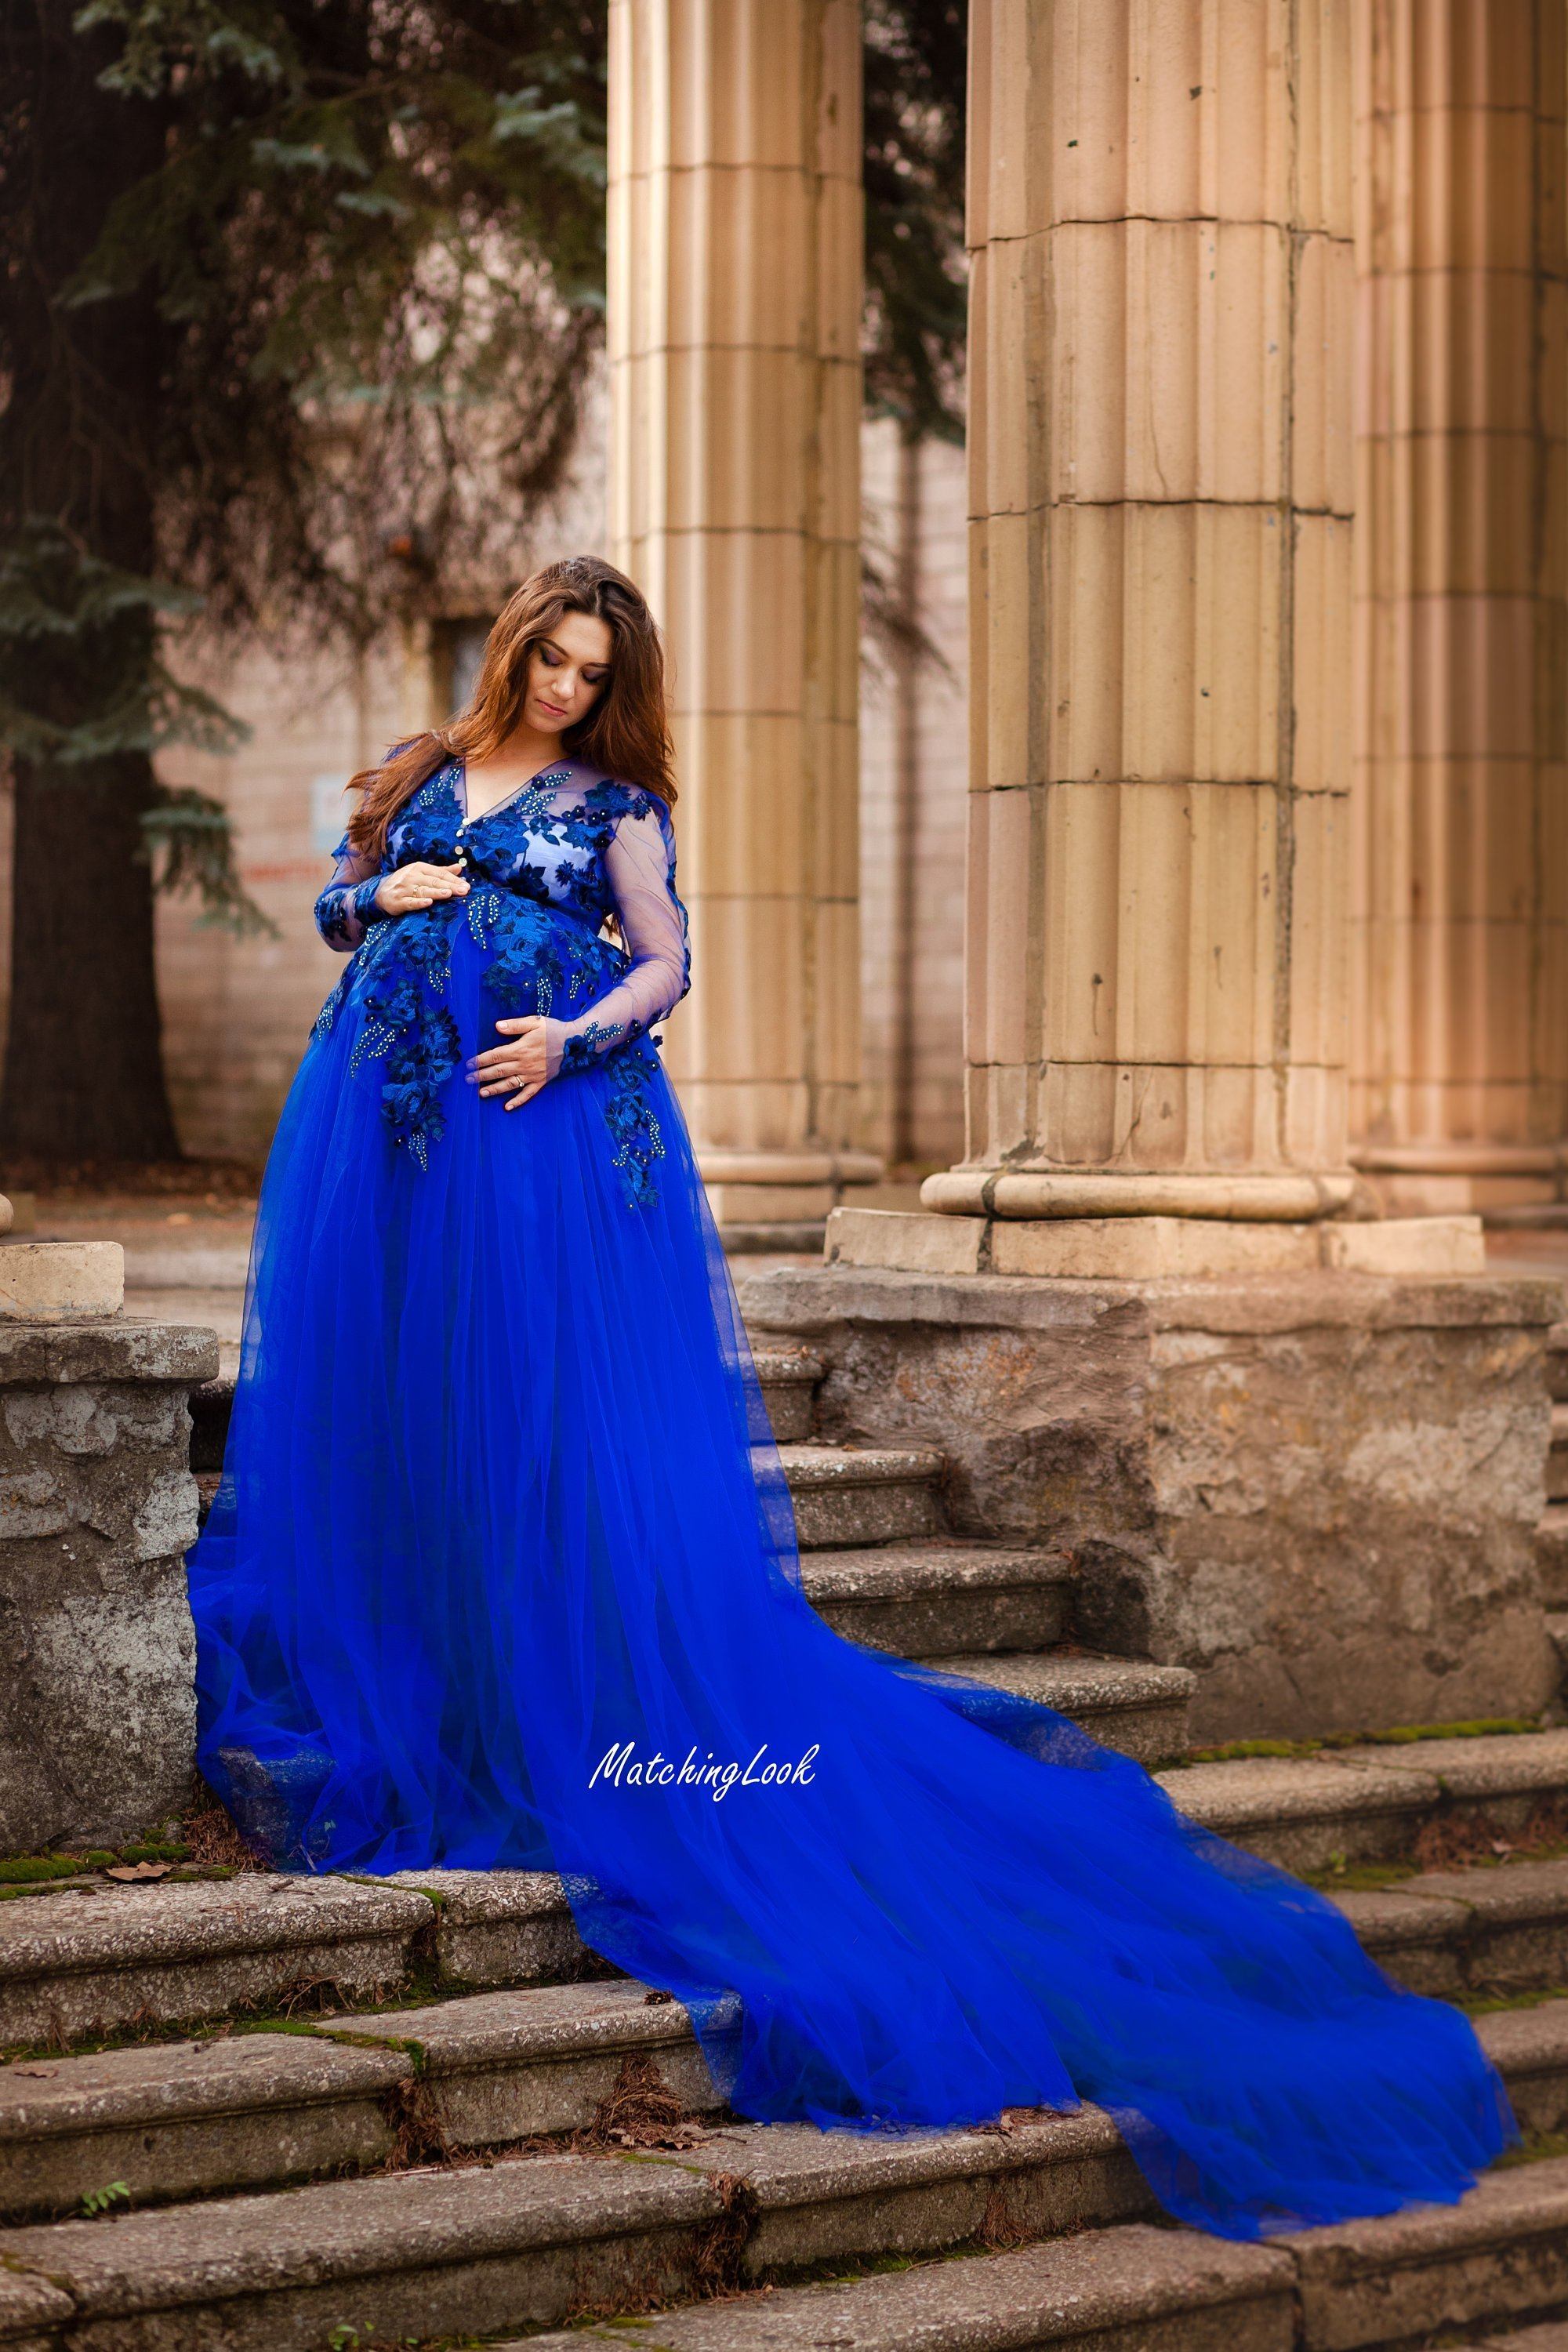 royal blue and gold maternity dress